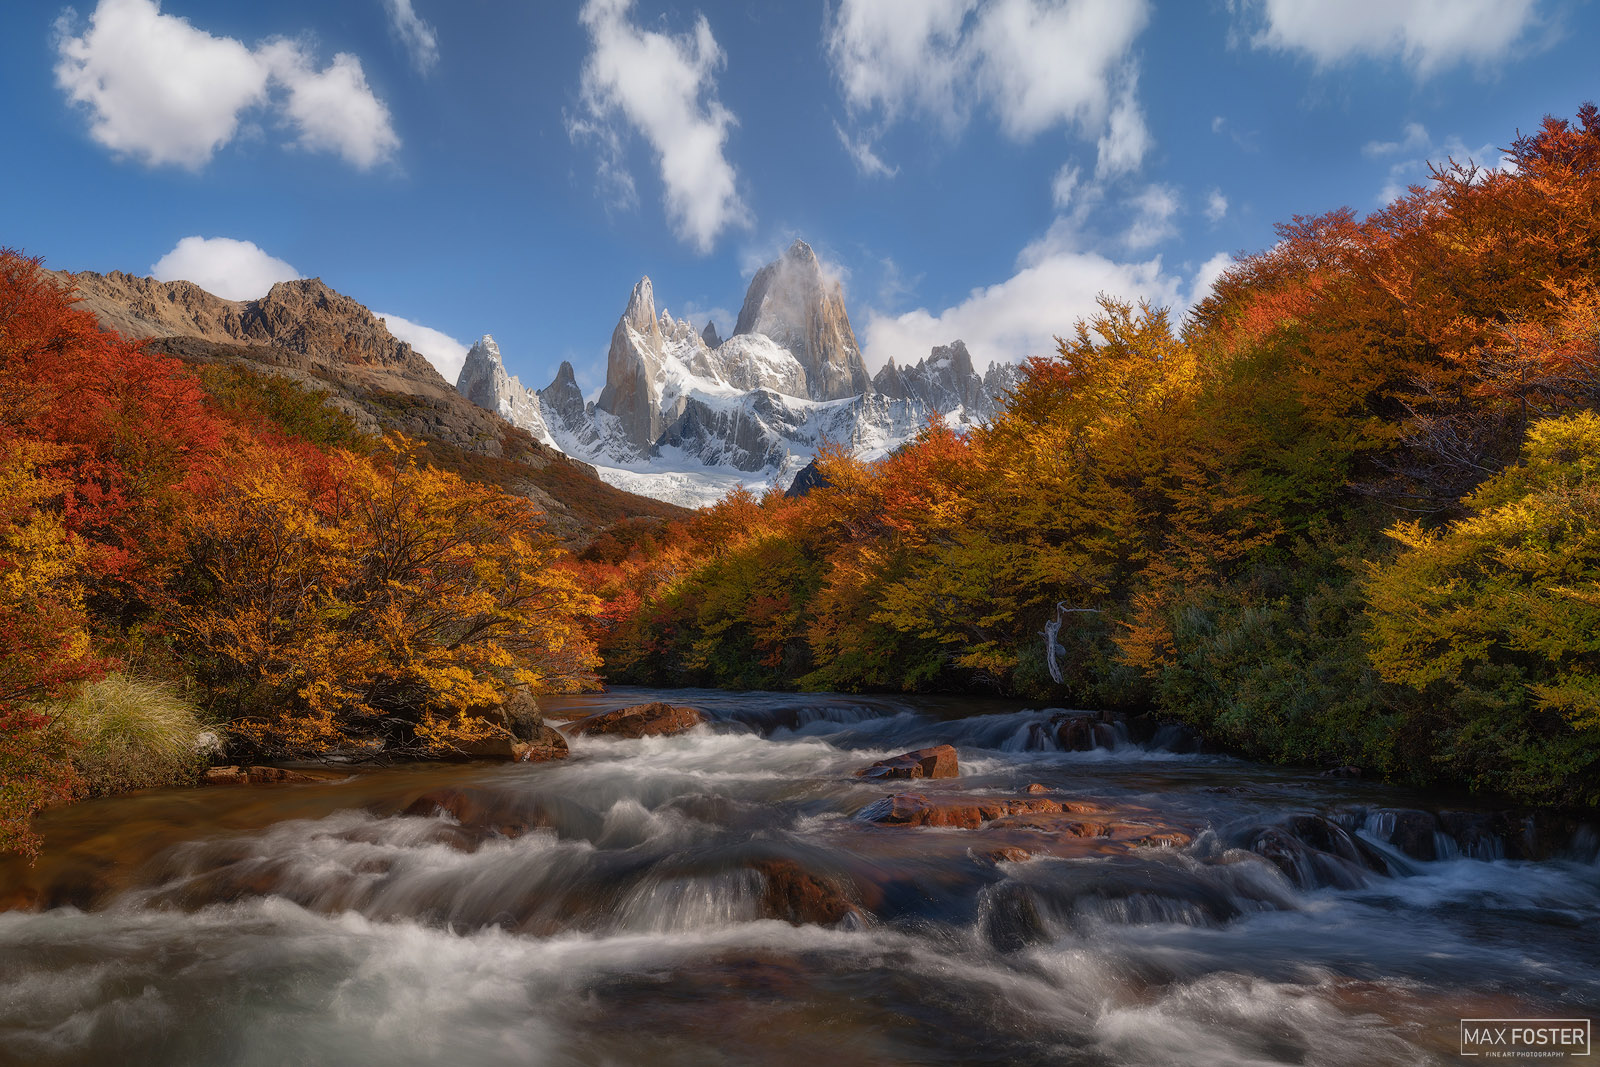 Breathe new life into your home with Unveiled, Max Foster's limited edition photographic print of Mount Fitz Roy in Los Glaciares...